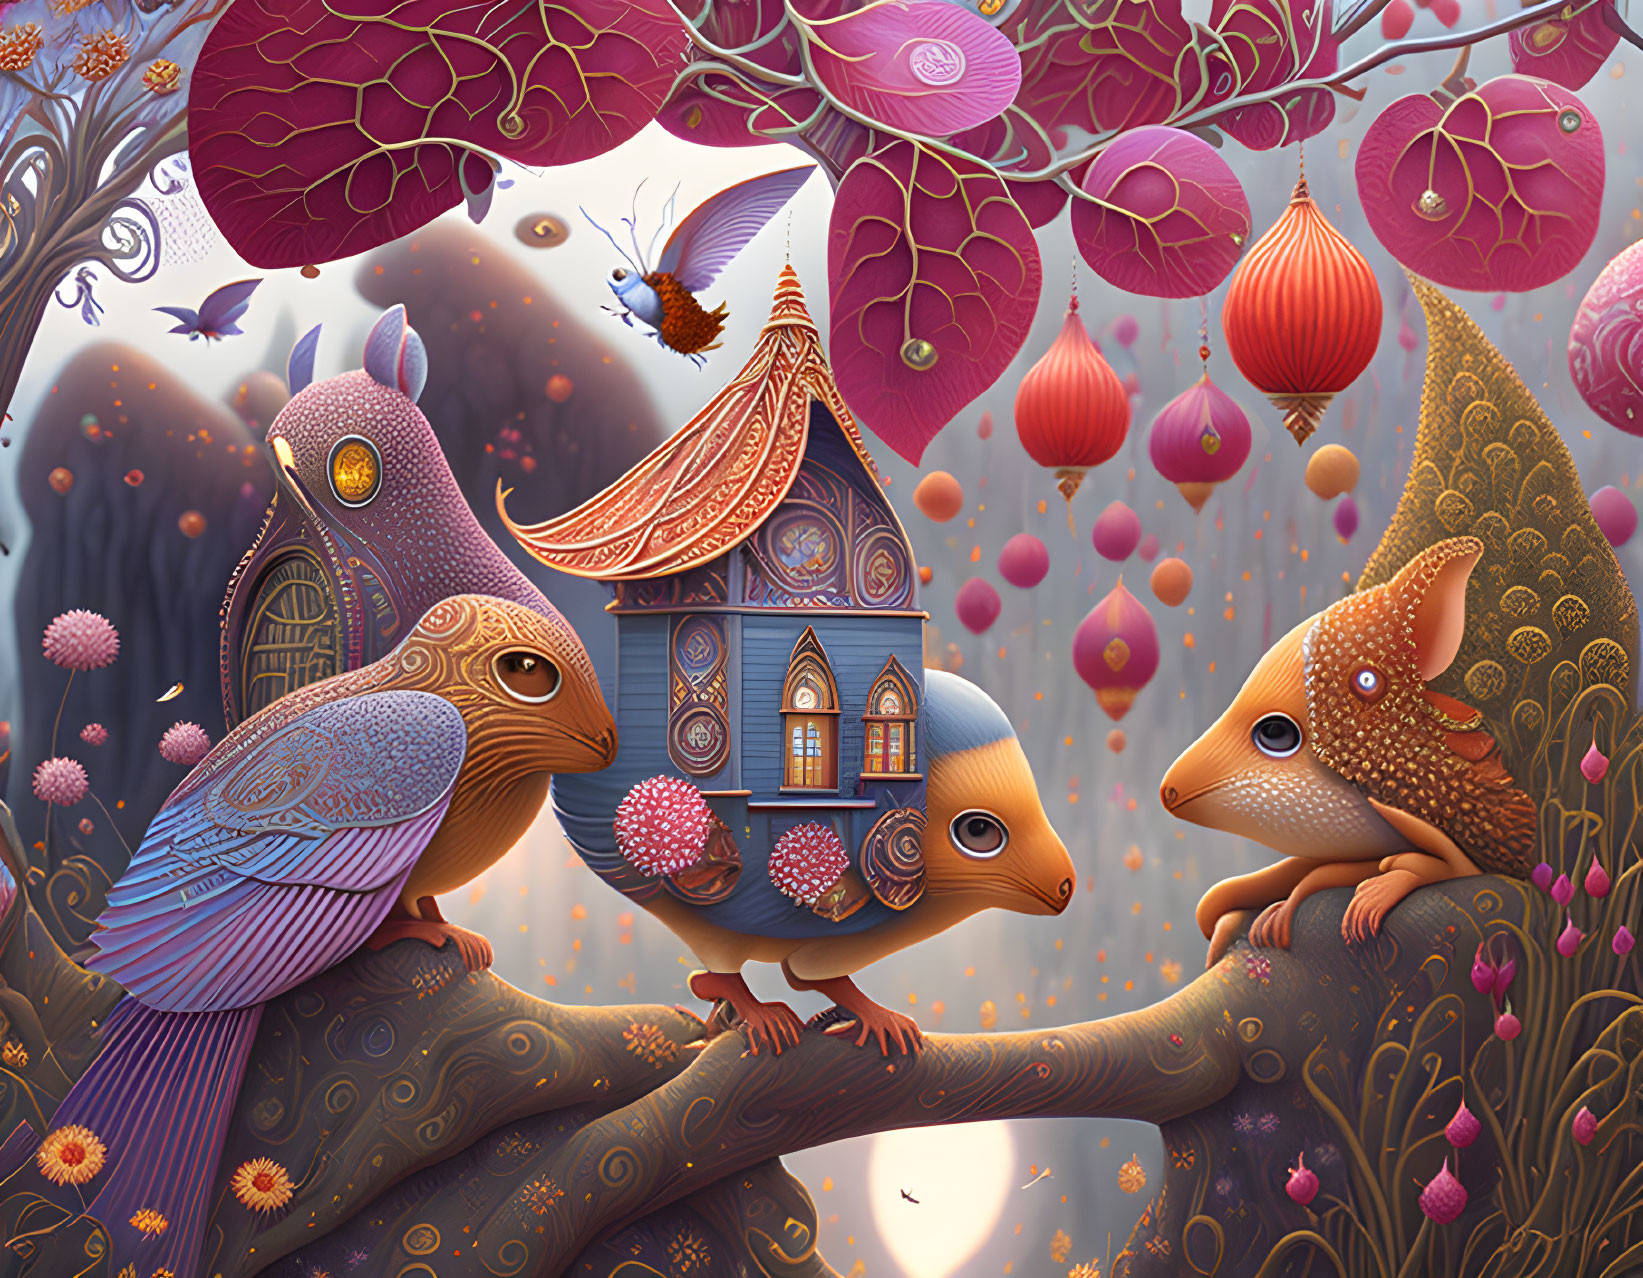 Anthropomorphic owl illustration with ornate house and vibrant surroundings